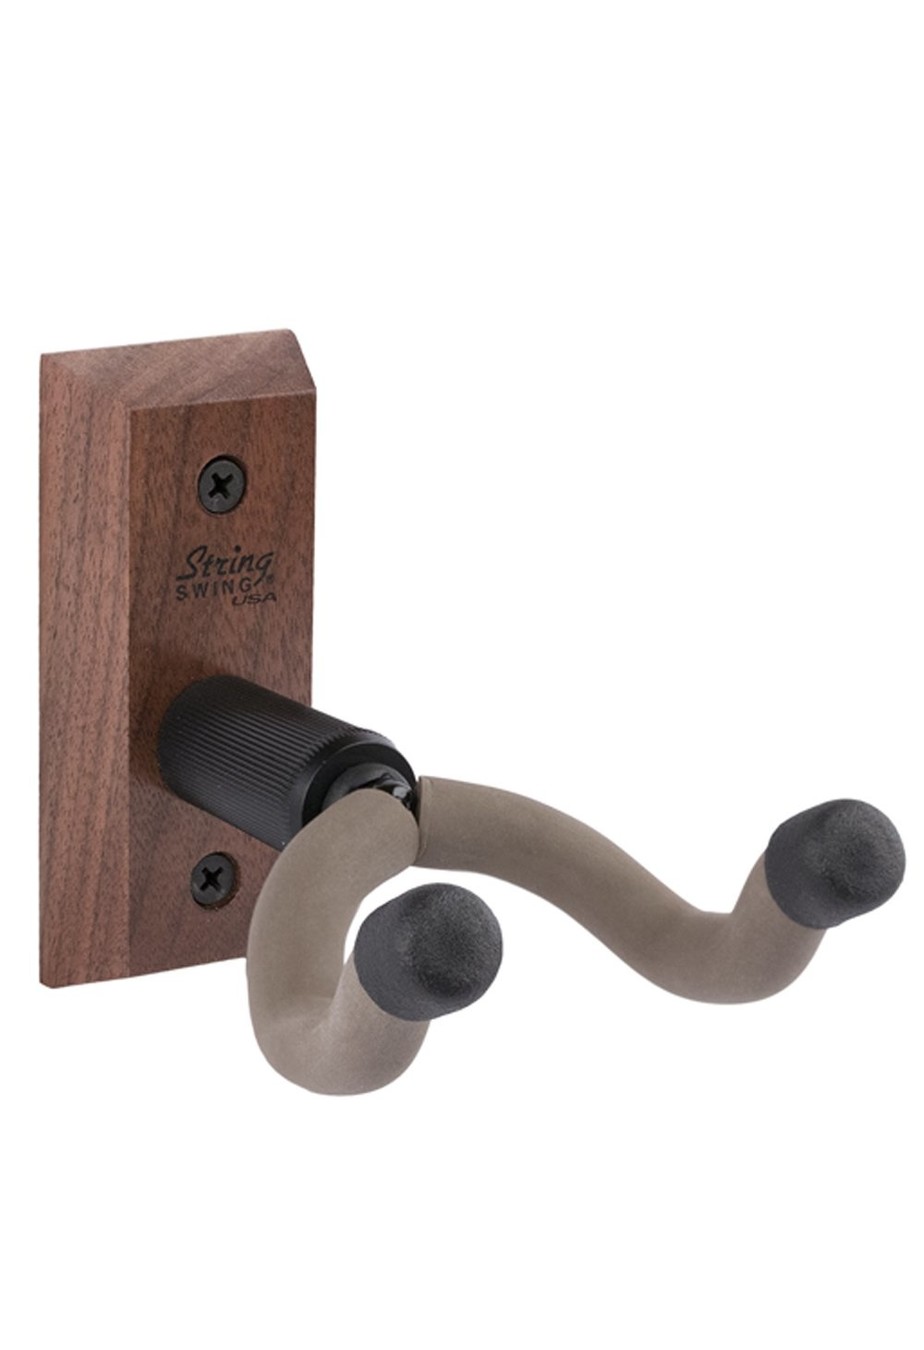 String Swing USA String Swing CC01K Guitar Hanger Wall Mount for Acoustic and Electric Guitars Black Walnut